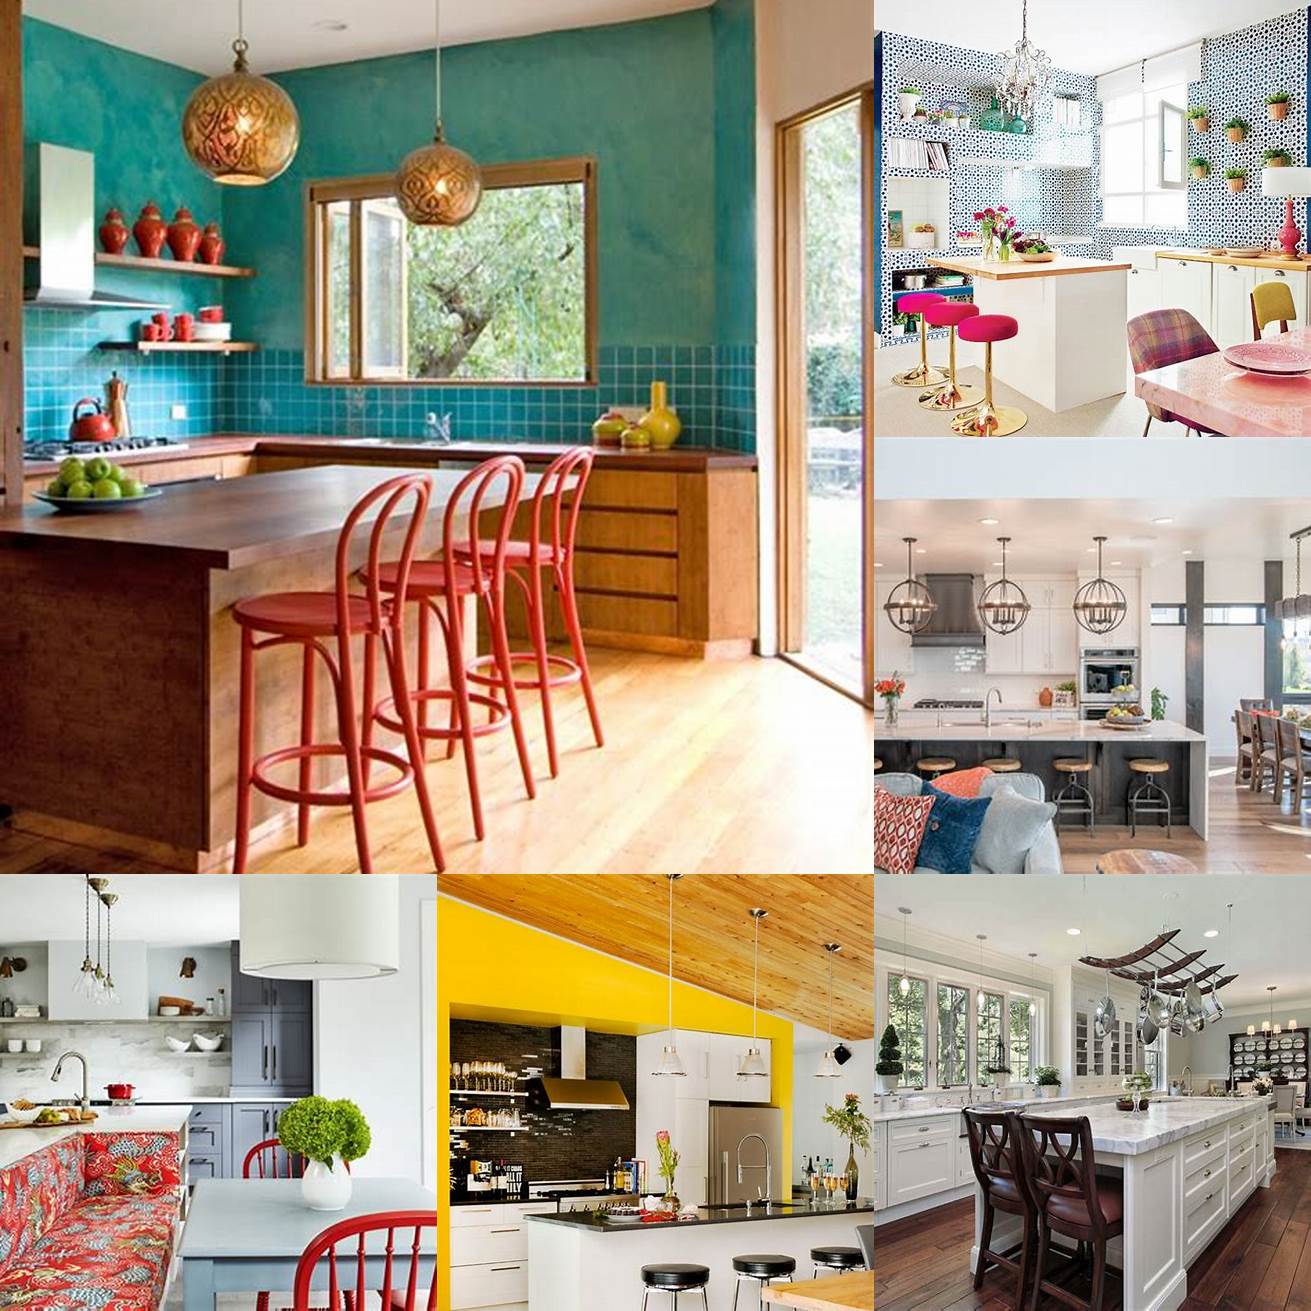 4 An open concept kitchen with a bold accent wall and colorful accessories